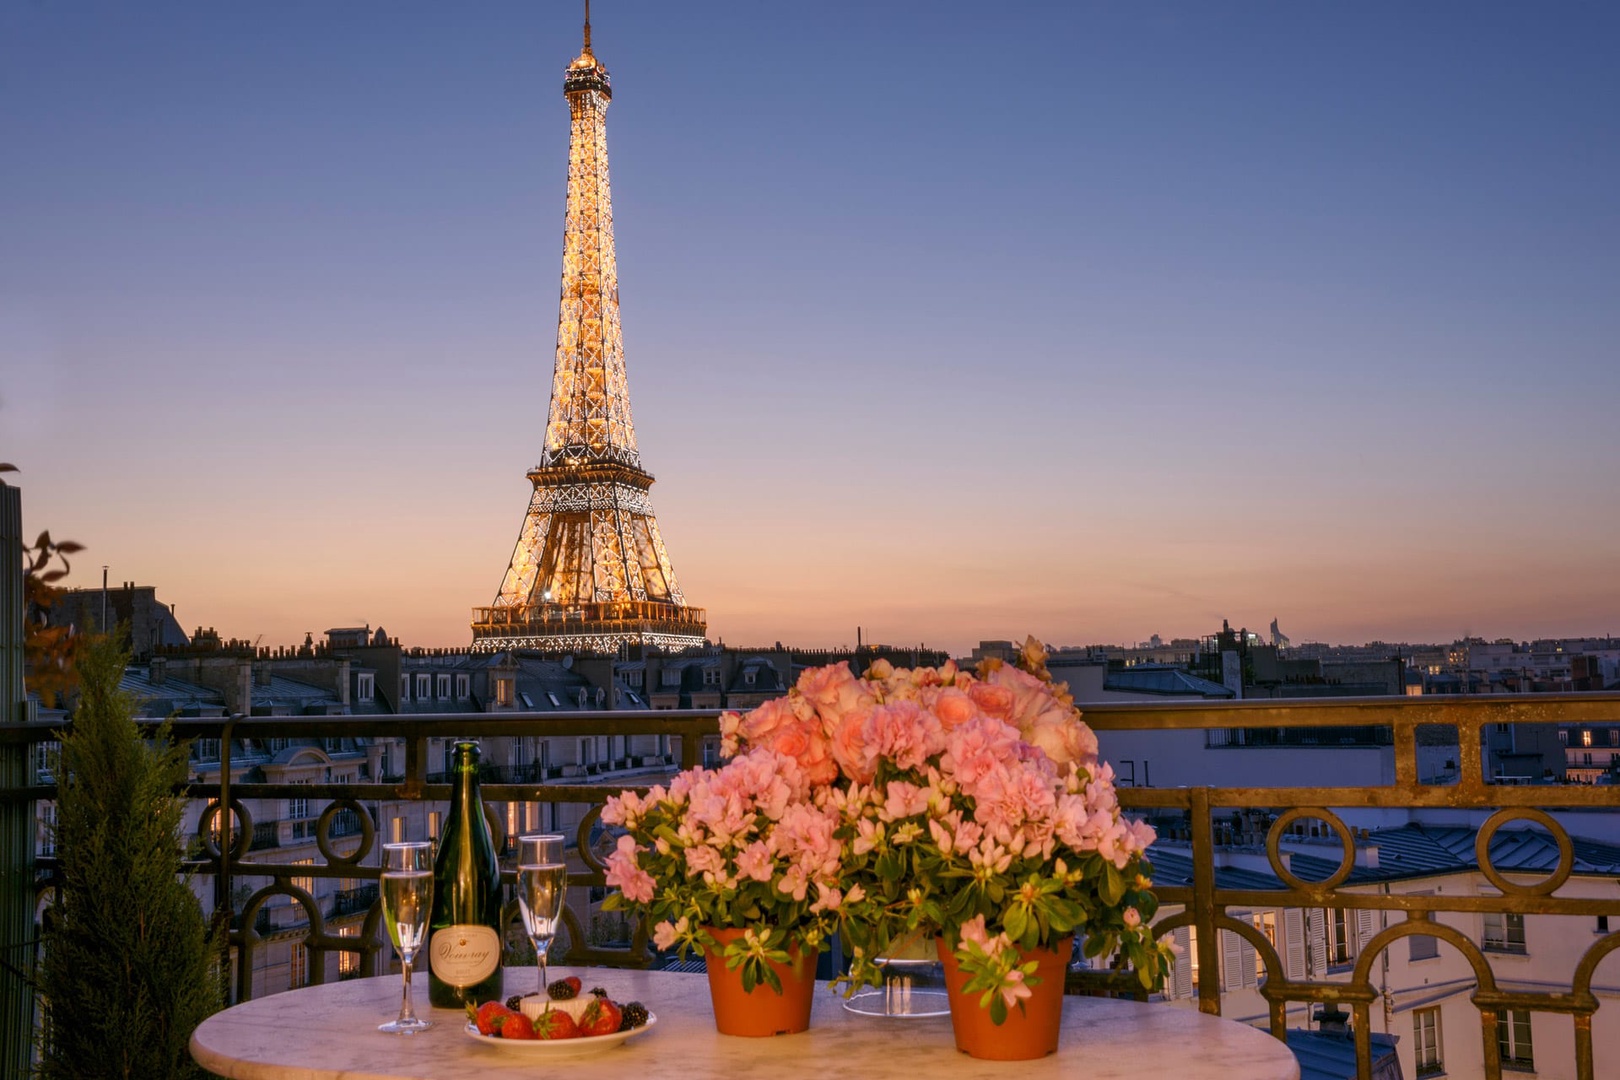 The Chateau Latour will take your breath away with its spectacular views of Paris!